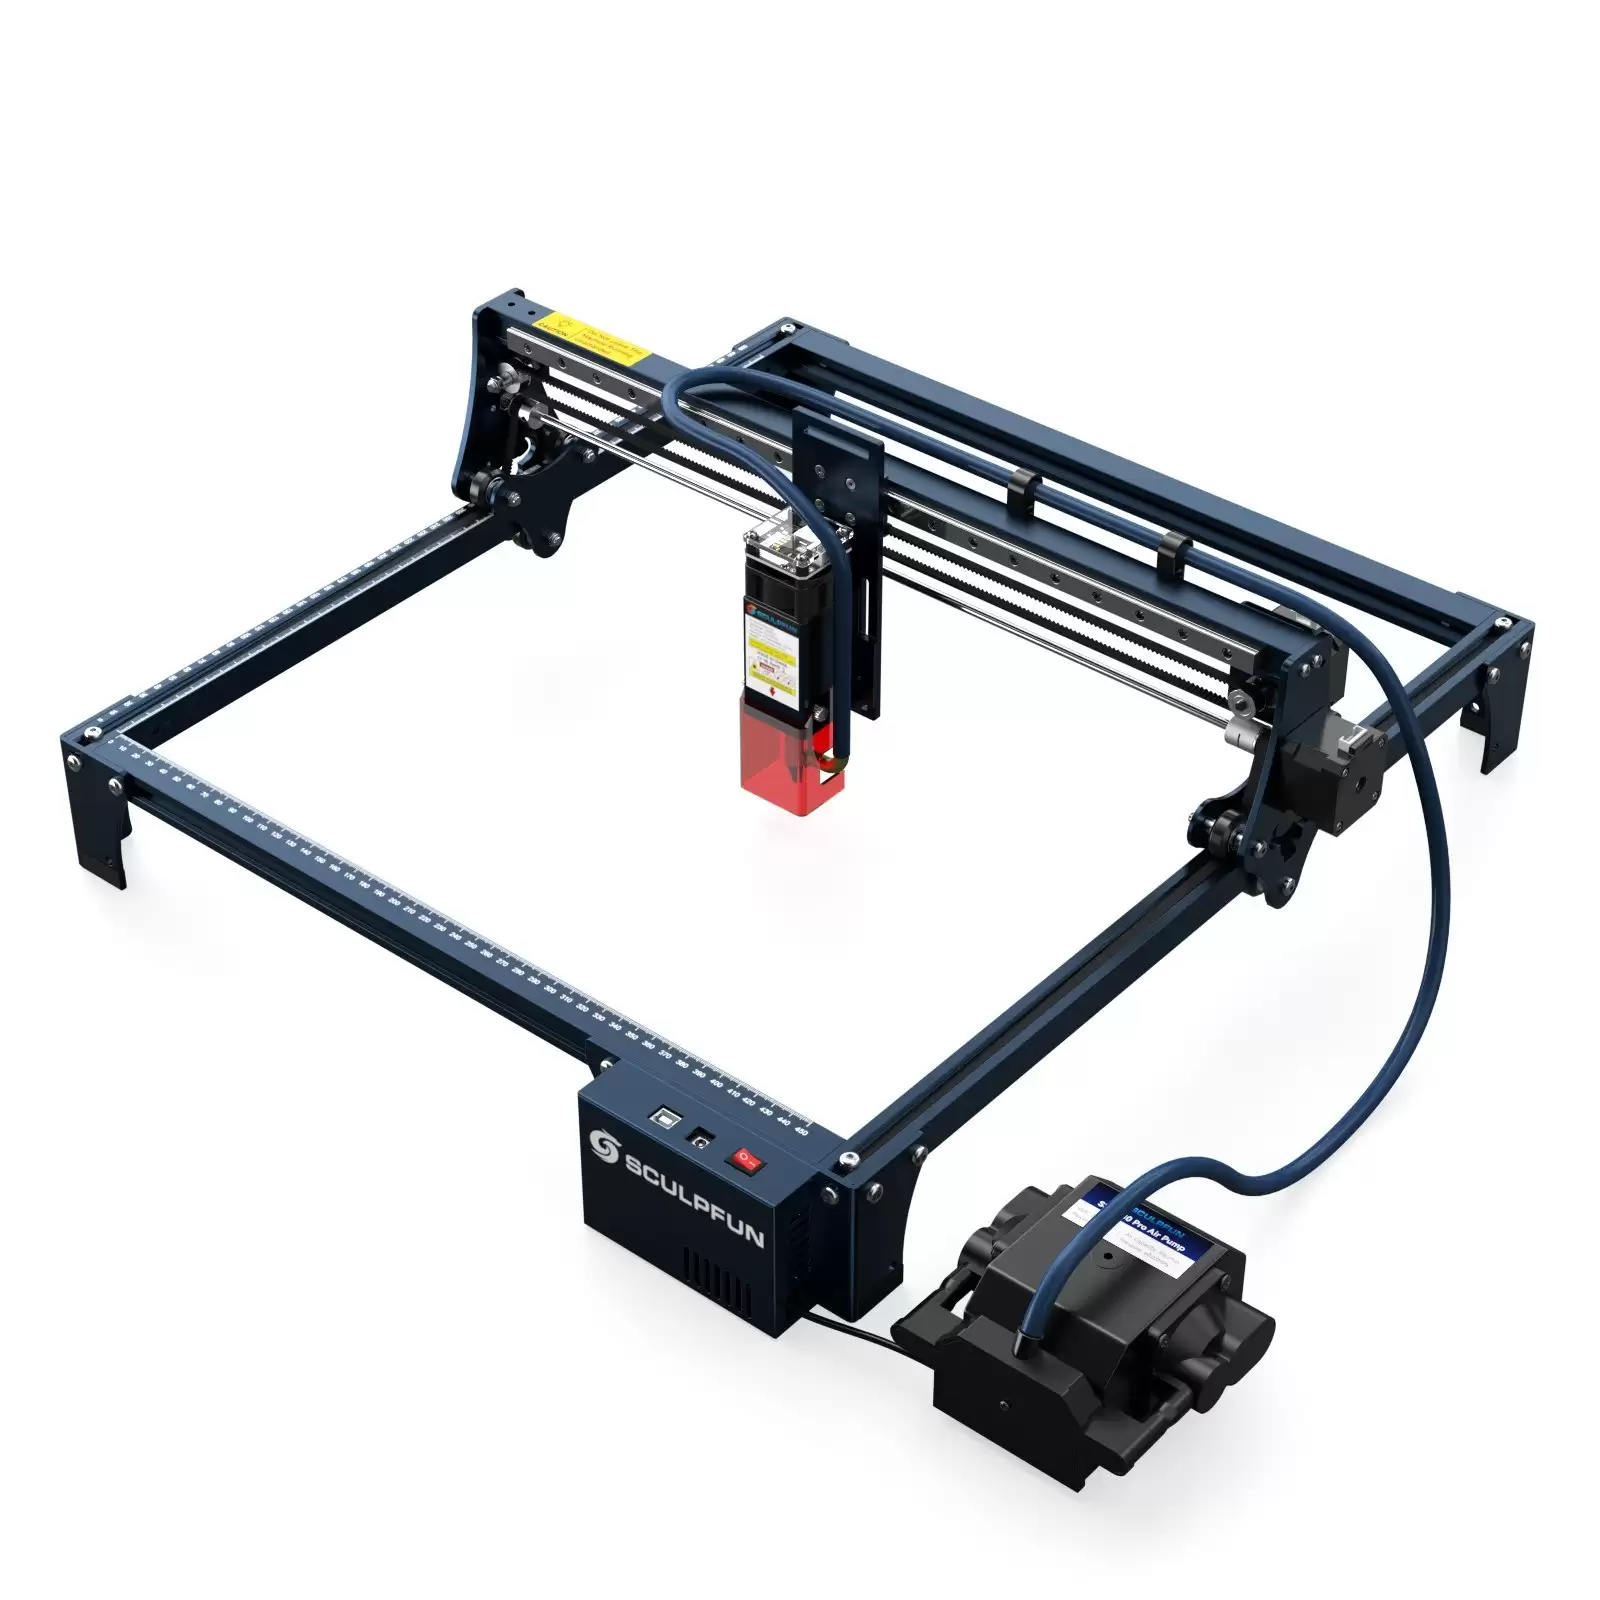 Order In Just $8234.31 Sulpfun S30 Pro 10w Laser Engraver With This Tomtop Discount Voucher